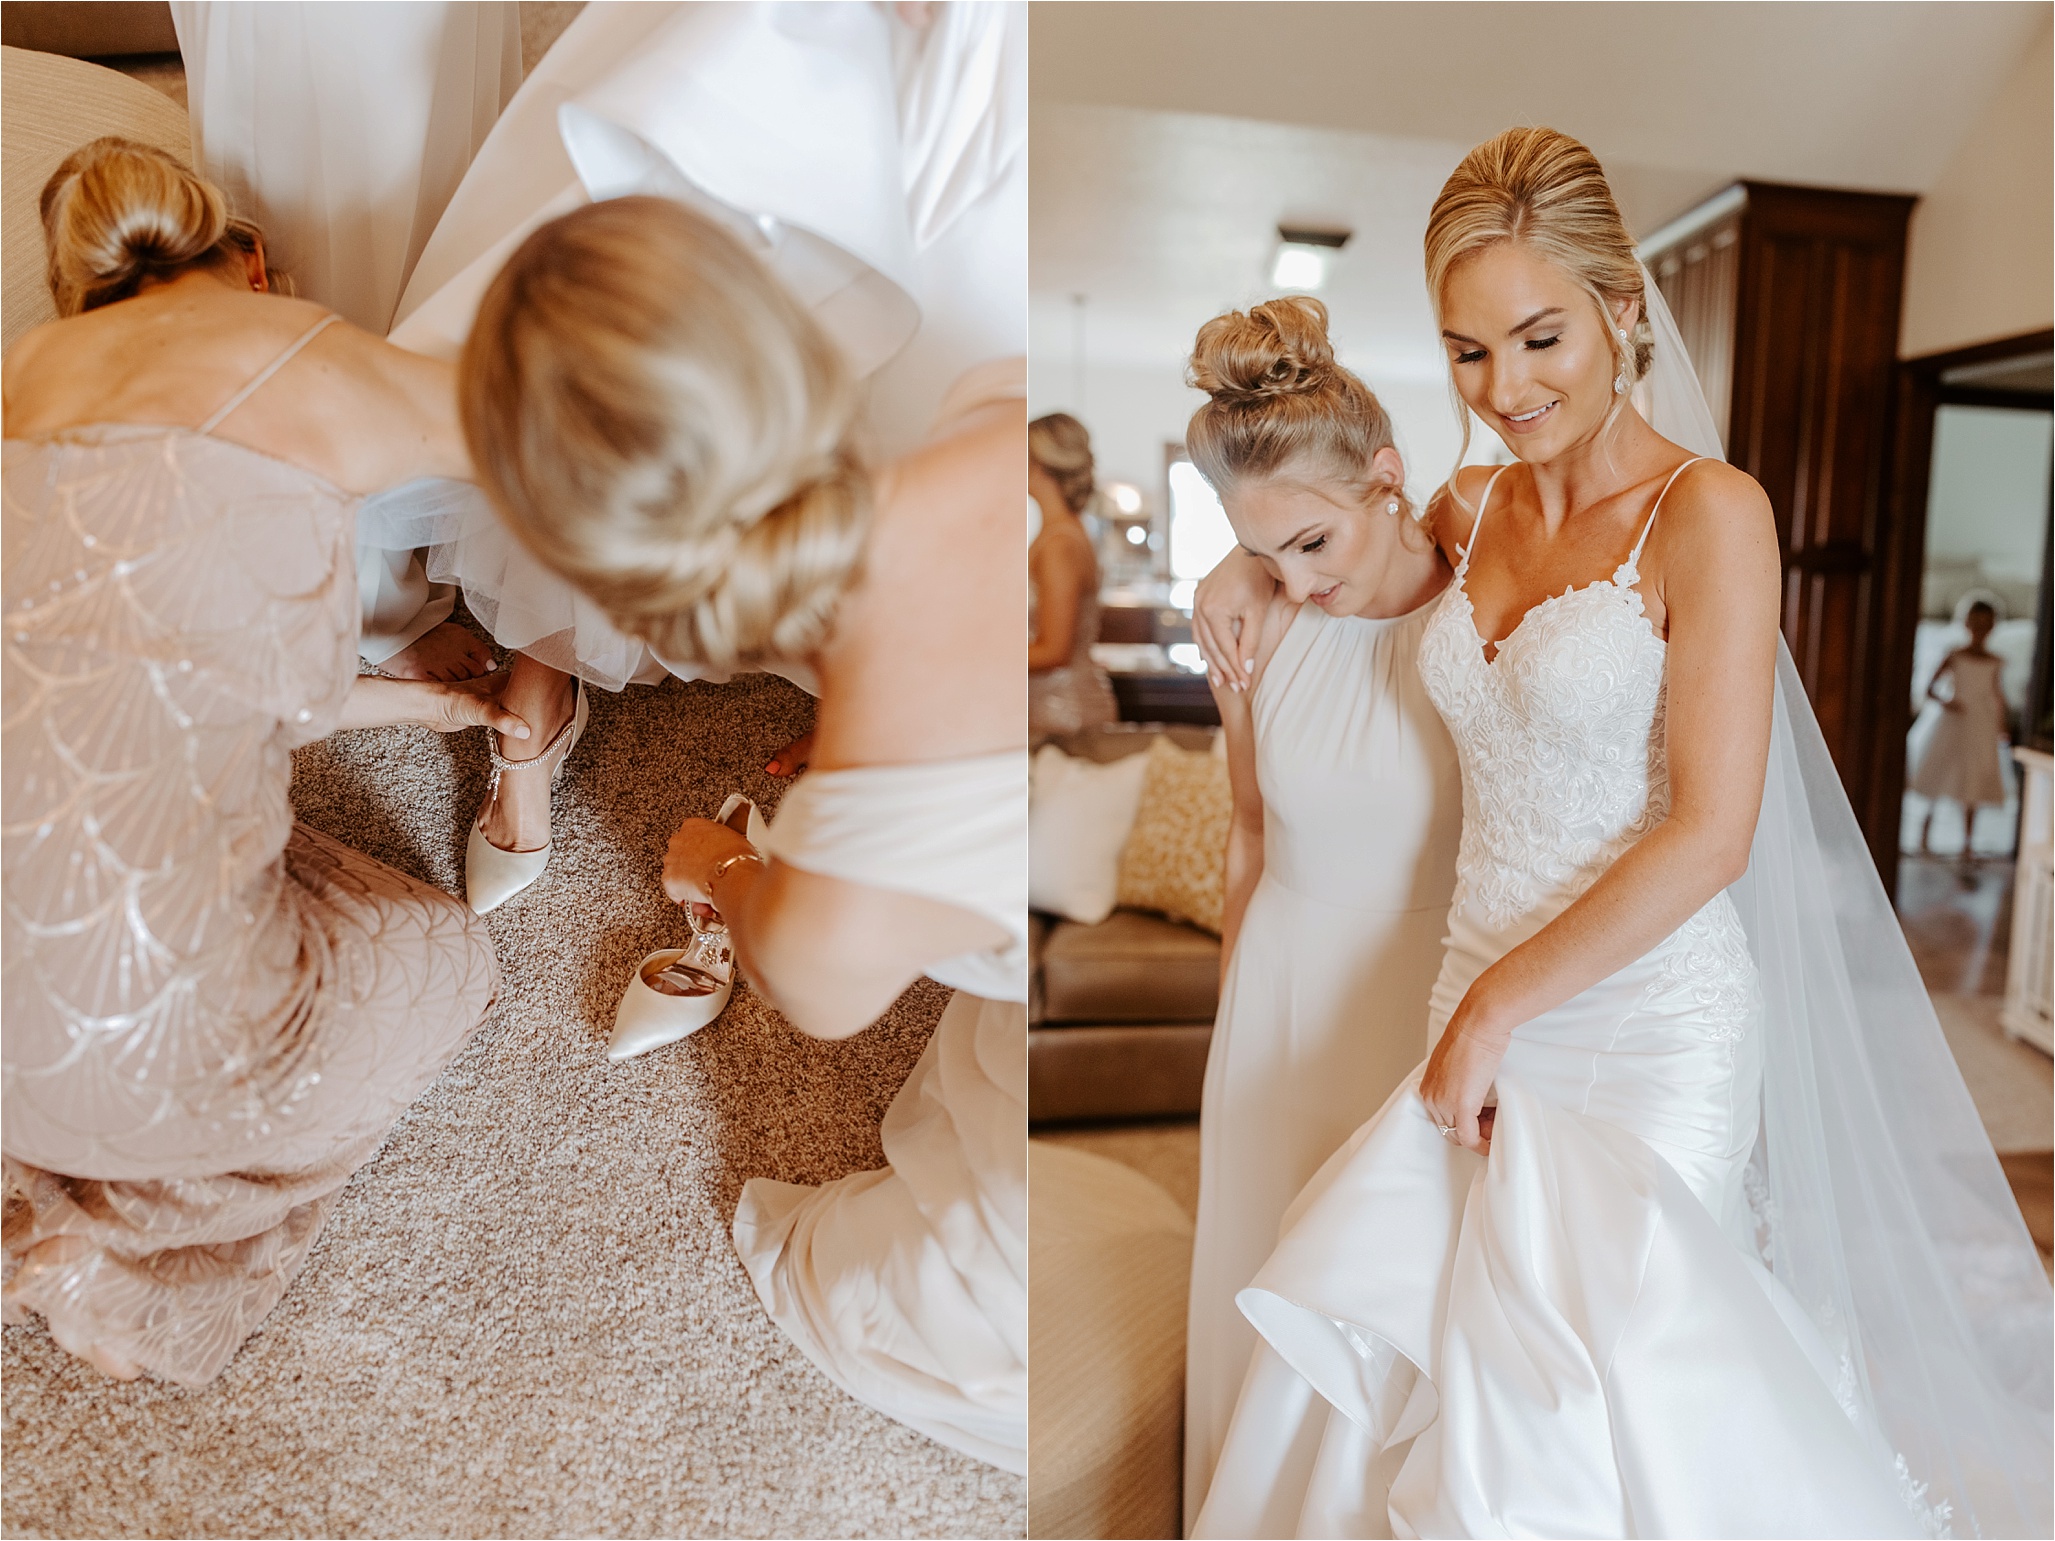 Summer Wedding Day at Millers Farm Barn in Central Illinois. Krystal Richmond Photography